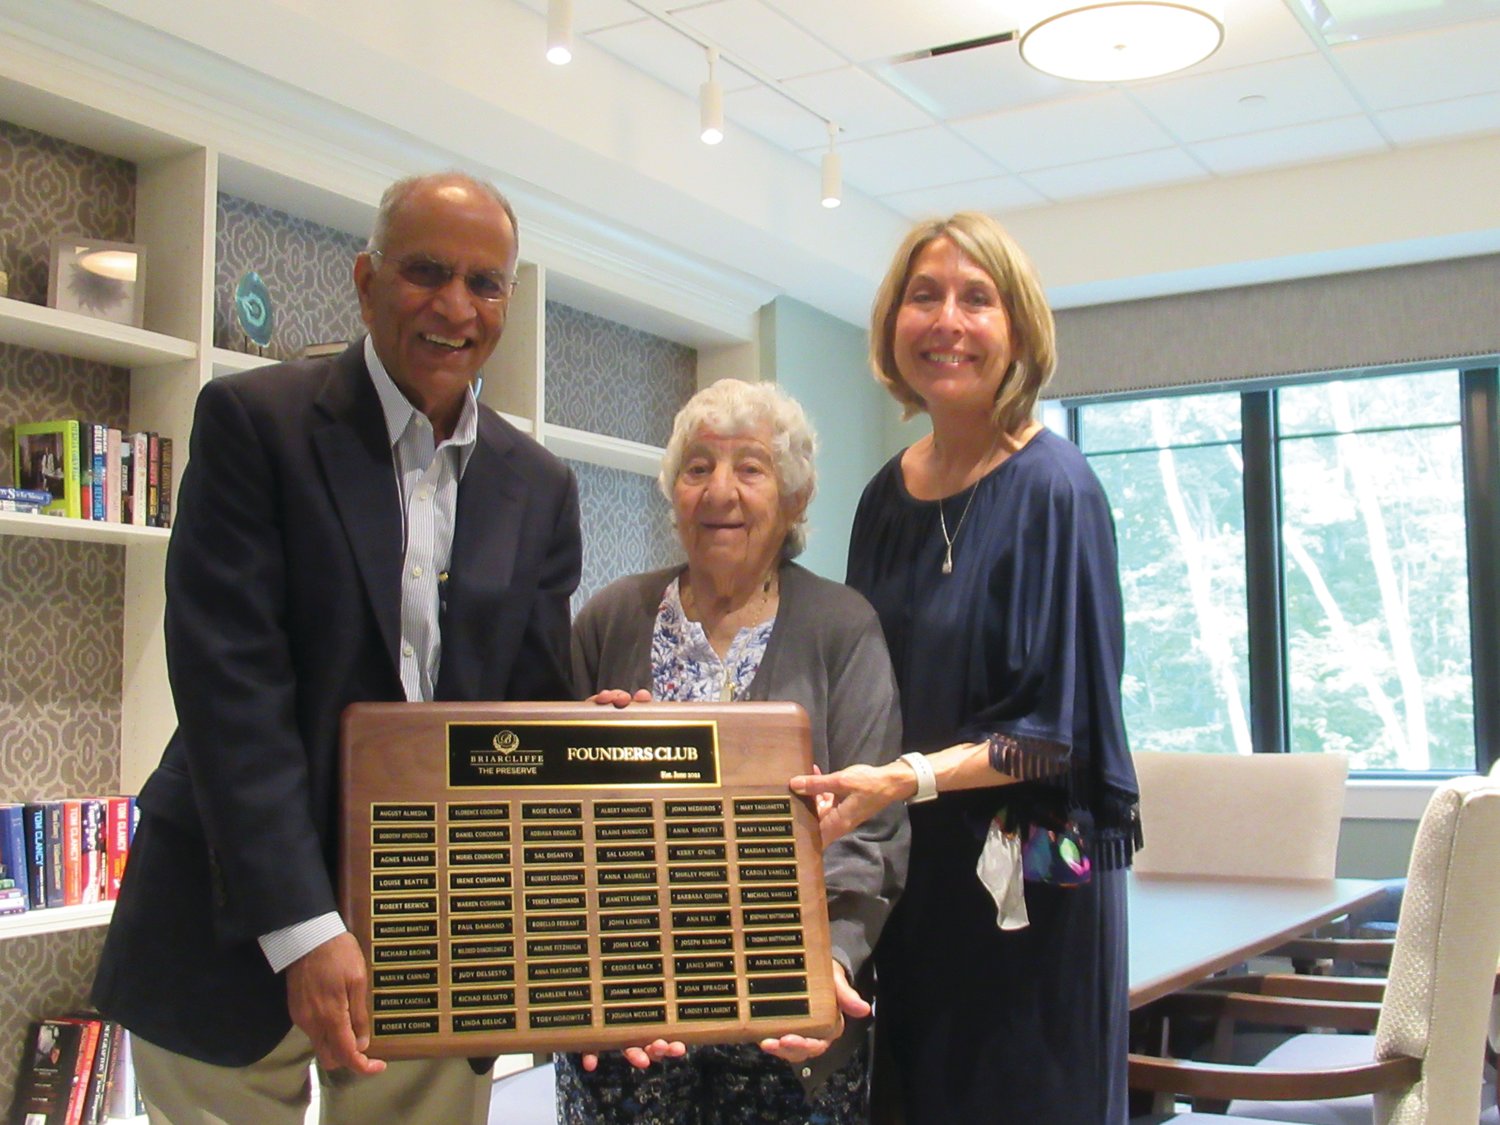 FANTASTIC FOUNDER: Anna Laurelli, 94, had the honor of holding The Preserve Founder’s Club permanent plaque along with Briarcliffe Own4r Akshay Talwar and Marketing Director Stefany Reed during last week’s posh party in Johnston.